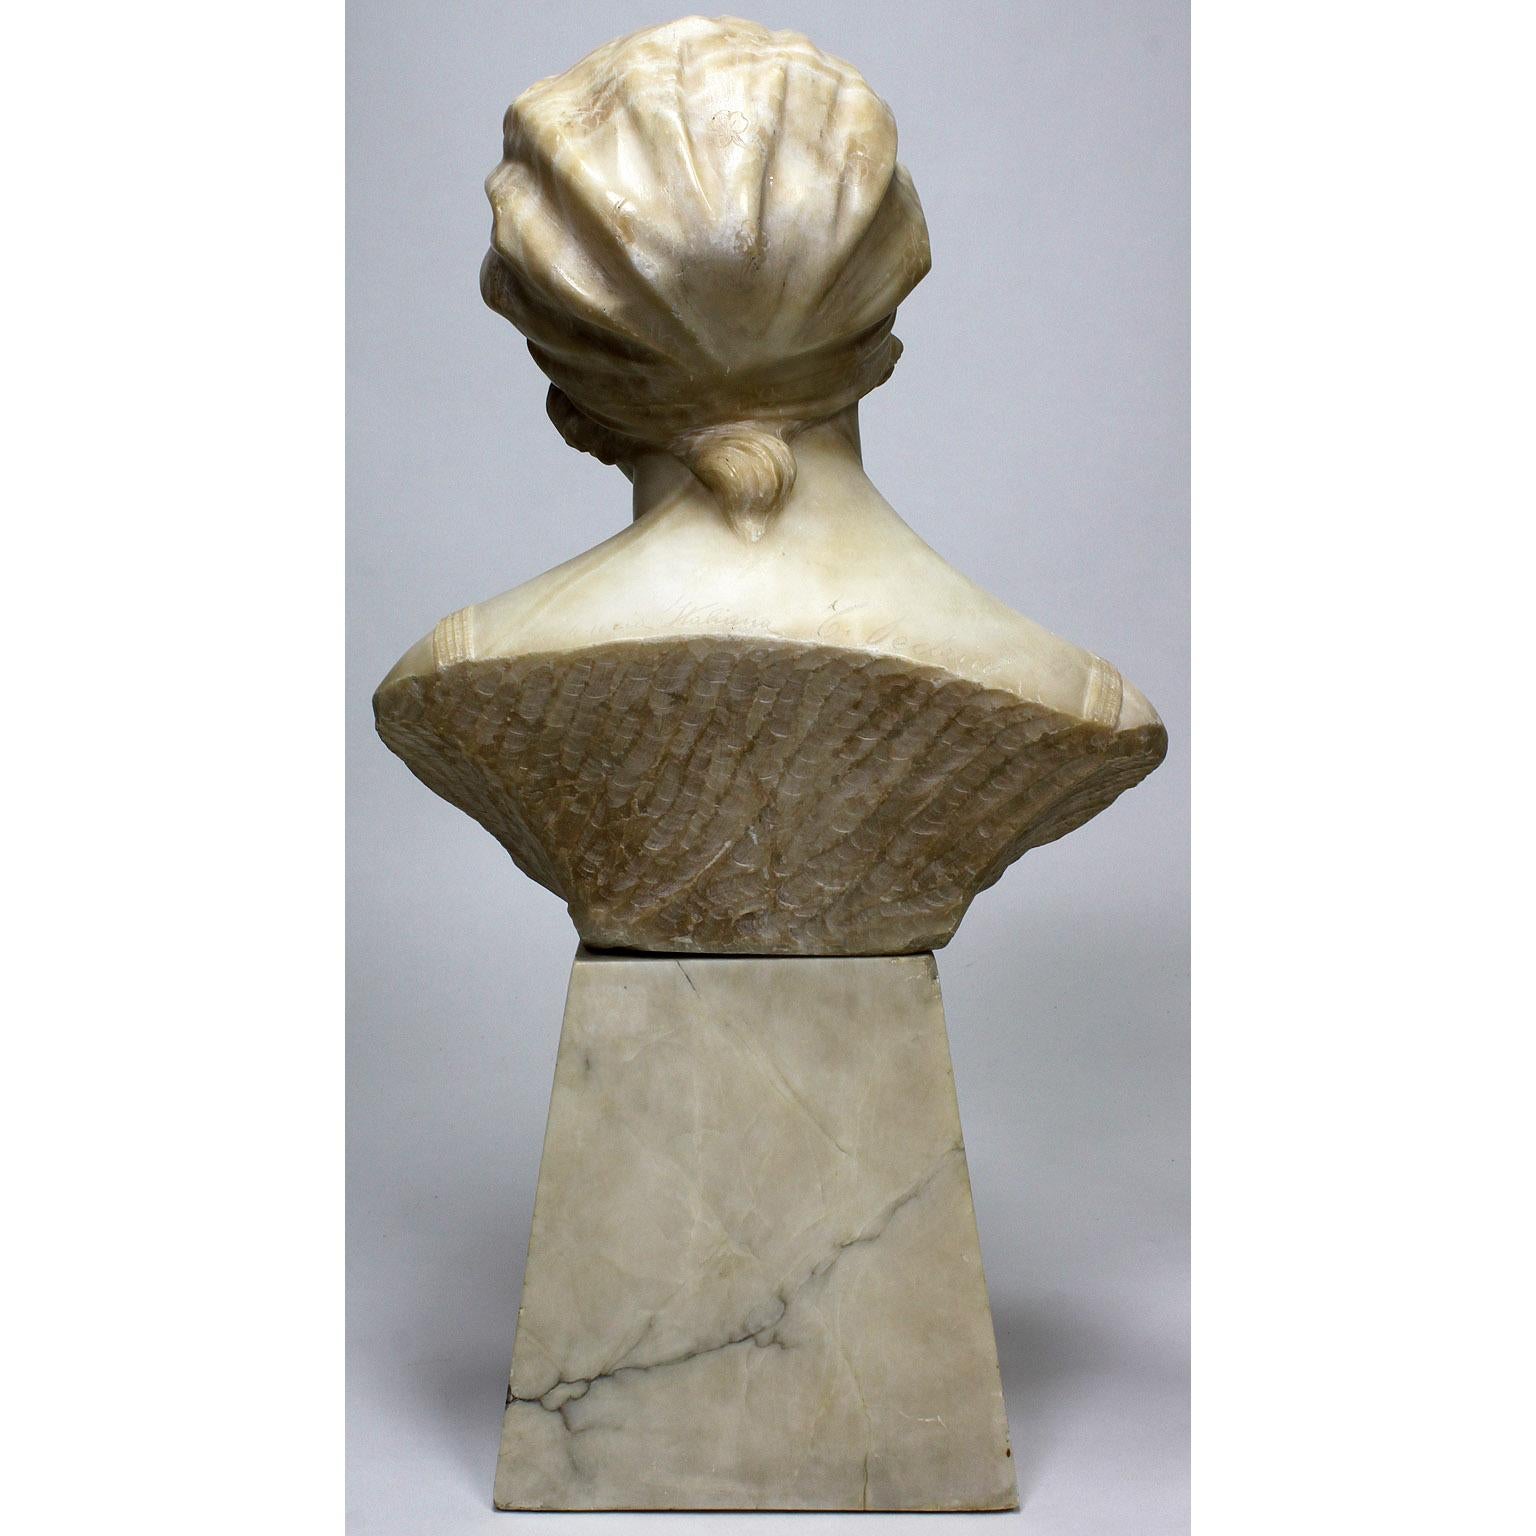  Italian 19th-20th Century Carved Alabaster Bust of a Young Girl with a Bandana For Sale 6